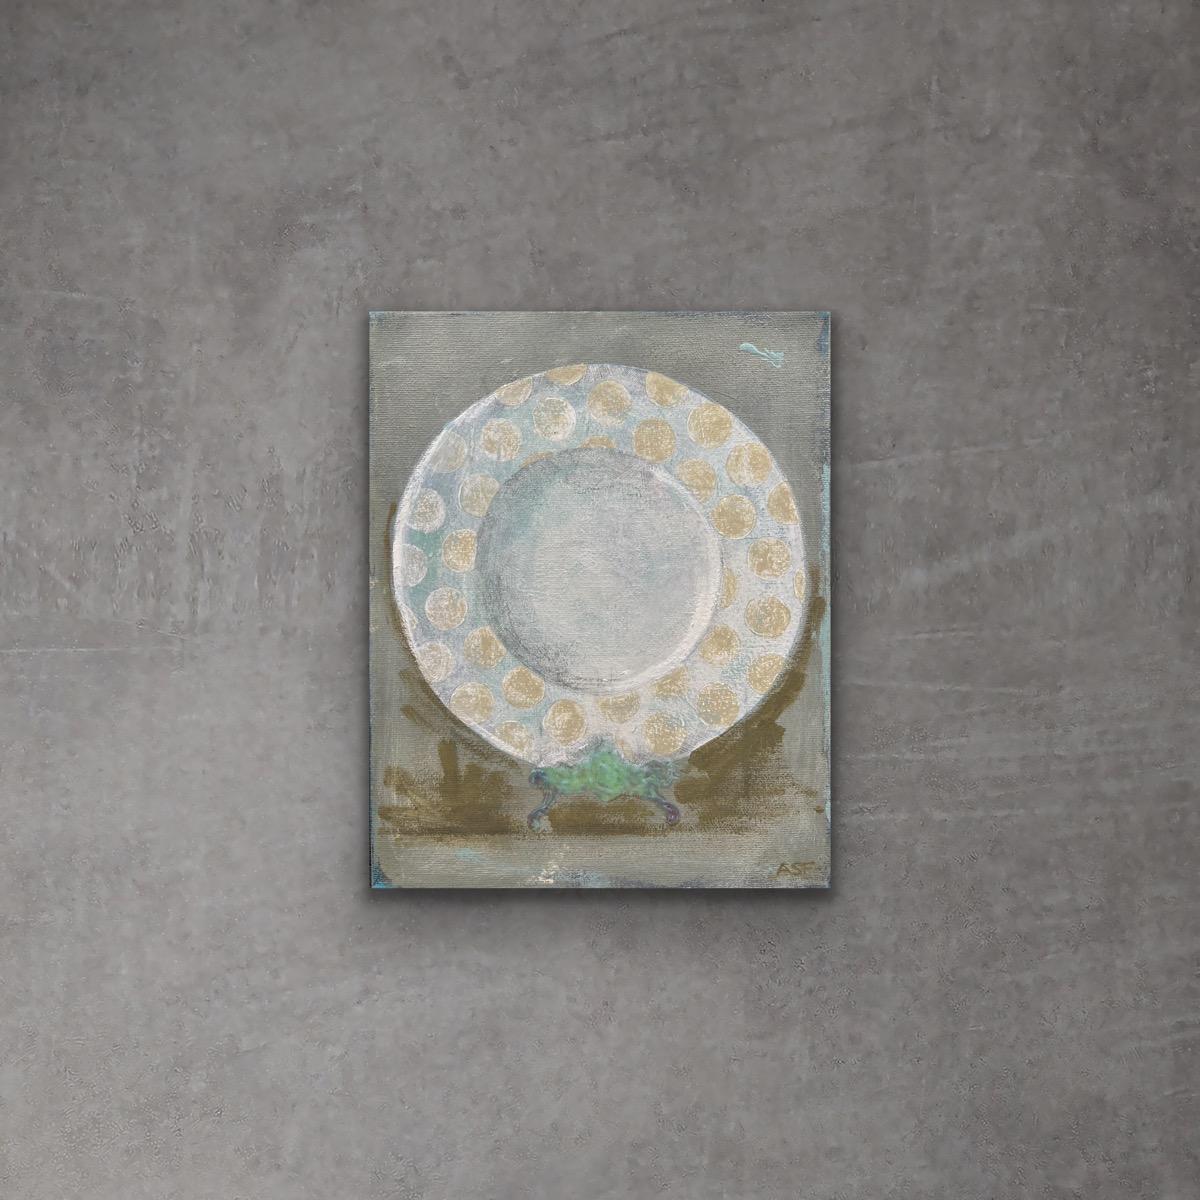 Dinner Plate 2 - 8"x10", Still Life Painting On Canvas, Muted Green, White - Art by Andrea Stajan-Ferkul